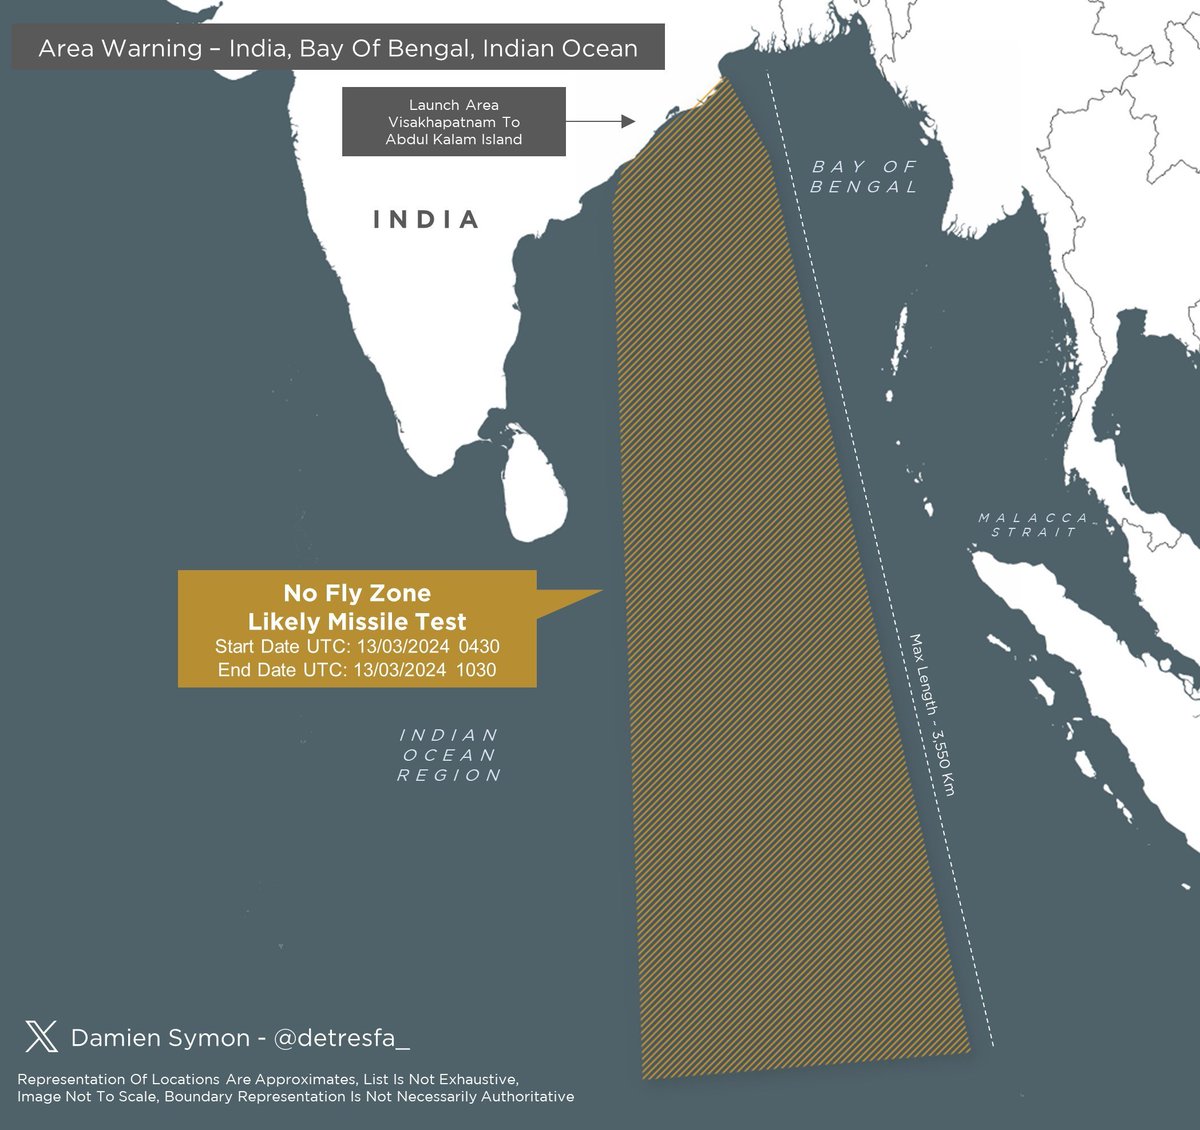 🚨🚨🚨 #AreaWarning #India issues a notification for a very large no fly zone over the Bay Of Bengal & Indian Ocean Region indicative of a likely missile test .
#DRDO
#Divyastra 
#NarendraModi 
#Agni   

Date | 13 March 24

One more AGNI-5 OR NEW VERSION....?

Source -@detresfa_